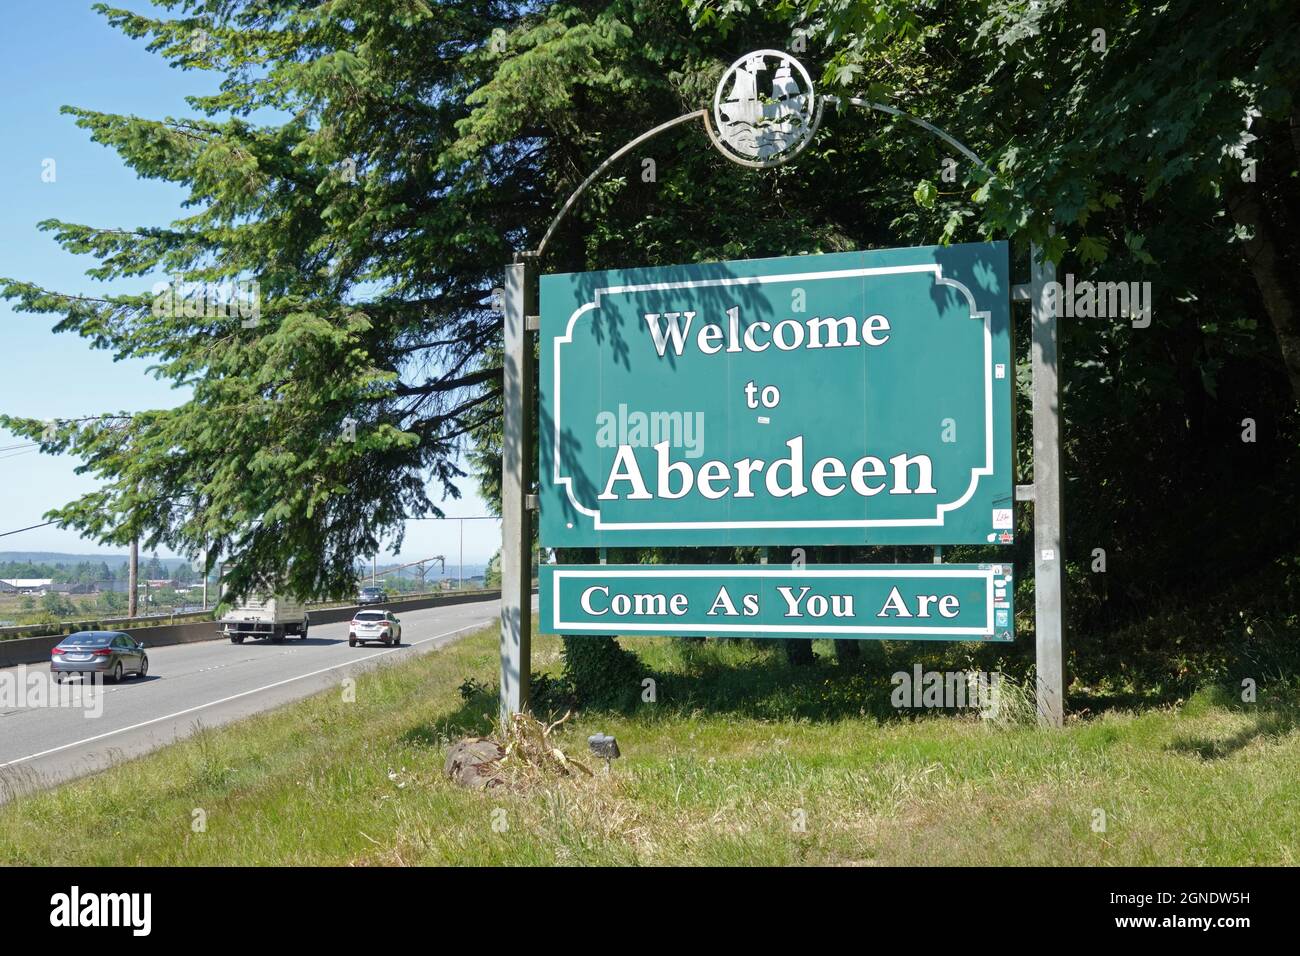 Aberdeen, WA / USA - June 21, 2021: A sign quoting Nirvana's 'Come As You Are' welcomes visitors to this city, near Washington state's west coast. Stock Photo